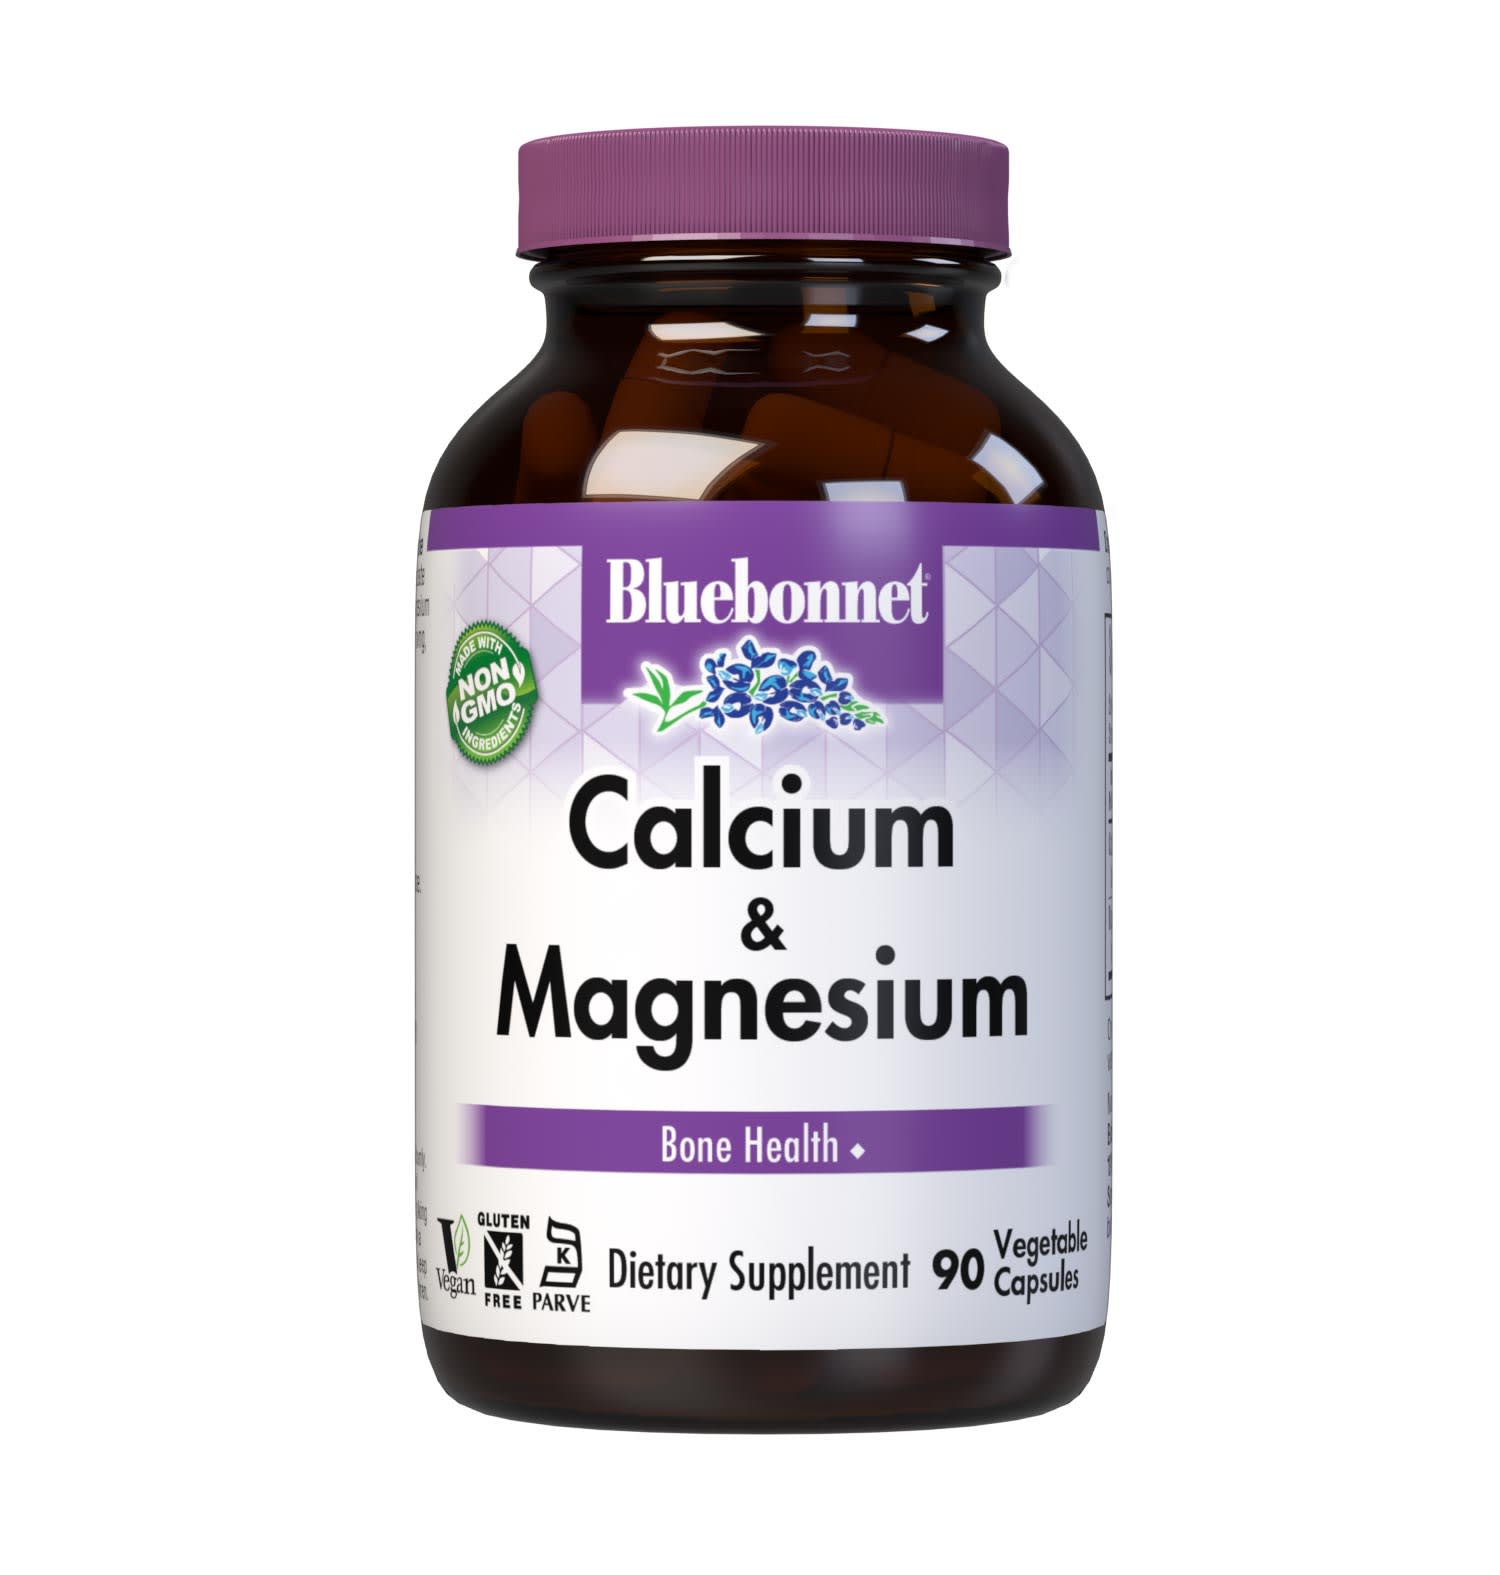 Bluebonnet's Calcium & Magnesium 90 Vegetable Capsules are formulated with calcium in a chelate of calcium citrate and malate, plus magnesium from fully reacted magnesium aspartate for strong, healthy bones. #size_90 count